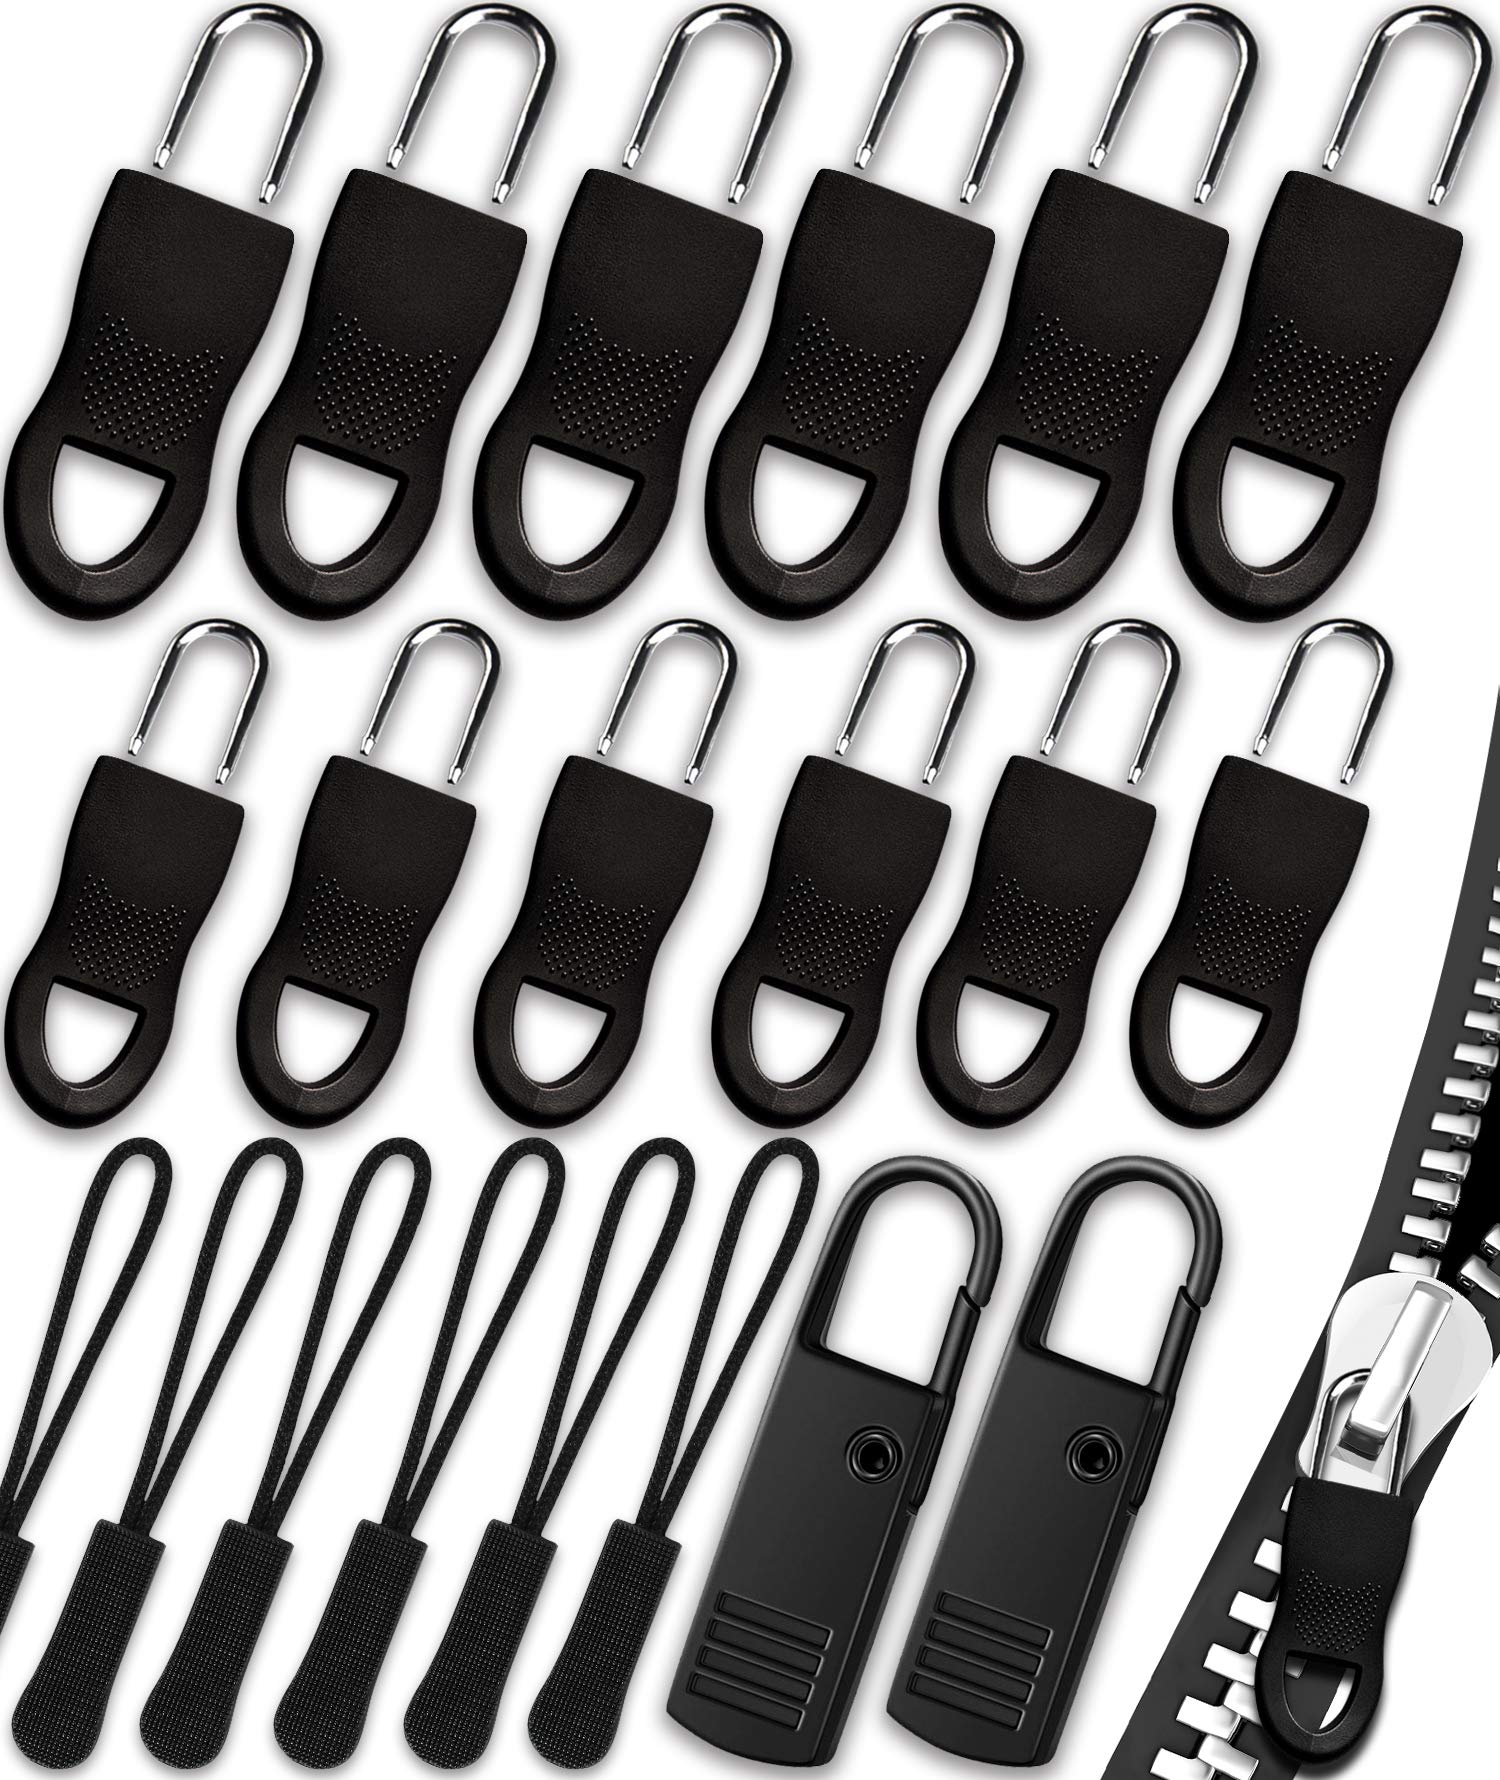 Robust and Secure Heavy Duty Zipper Pulls for Garments 